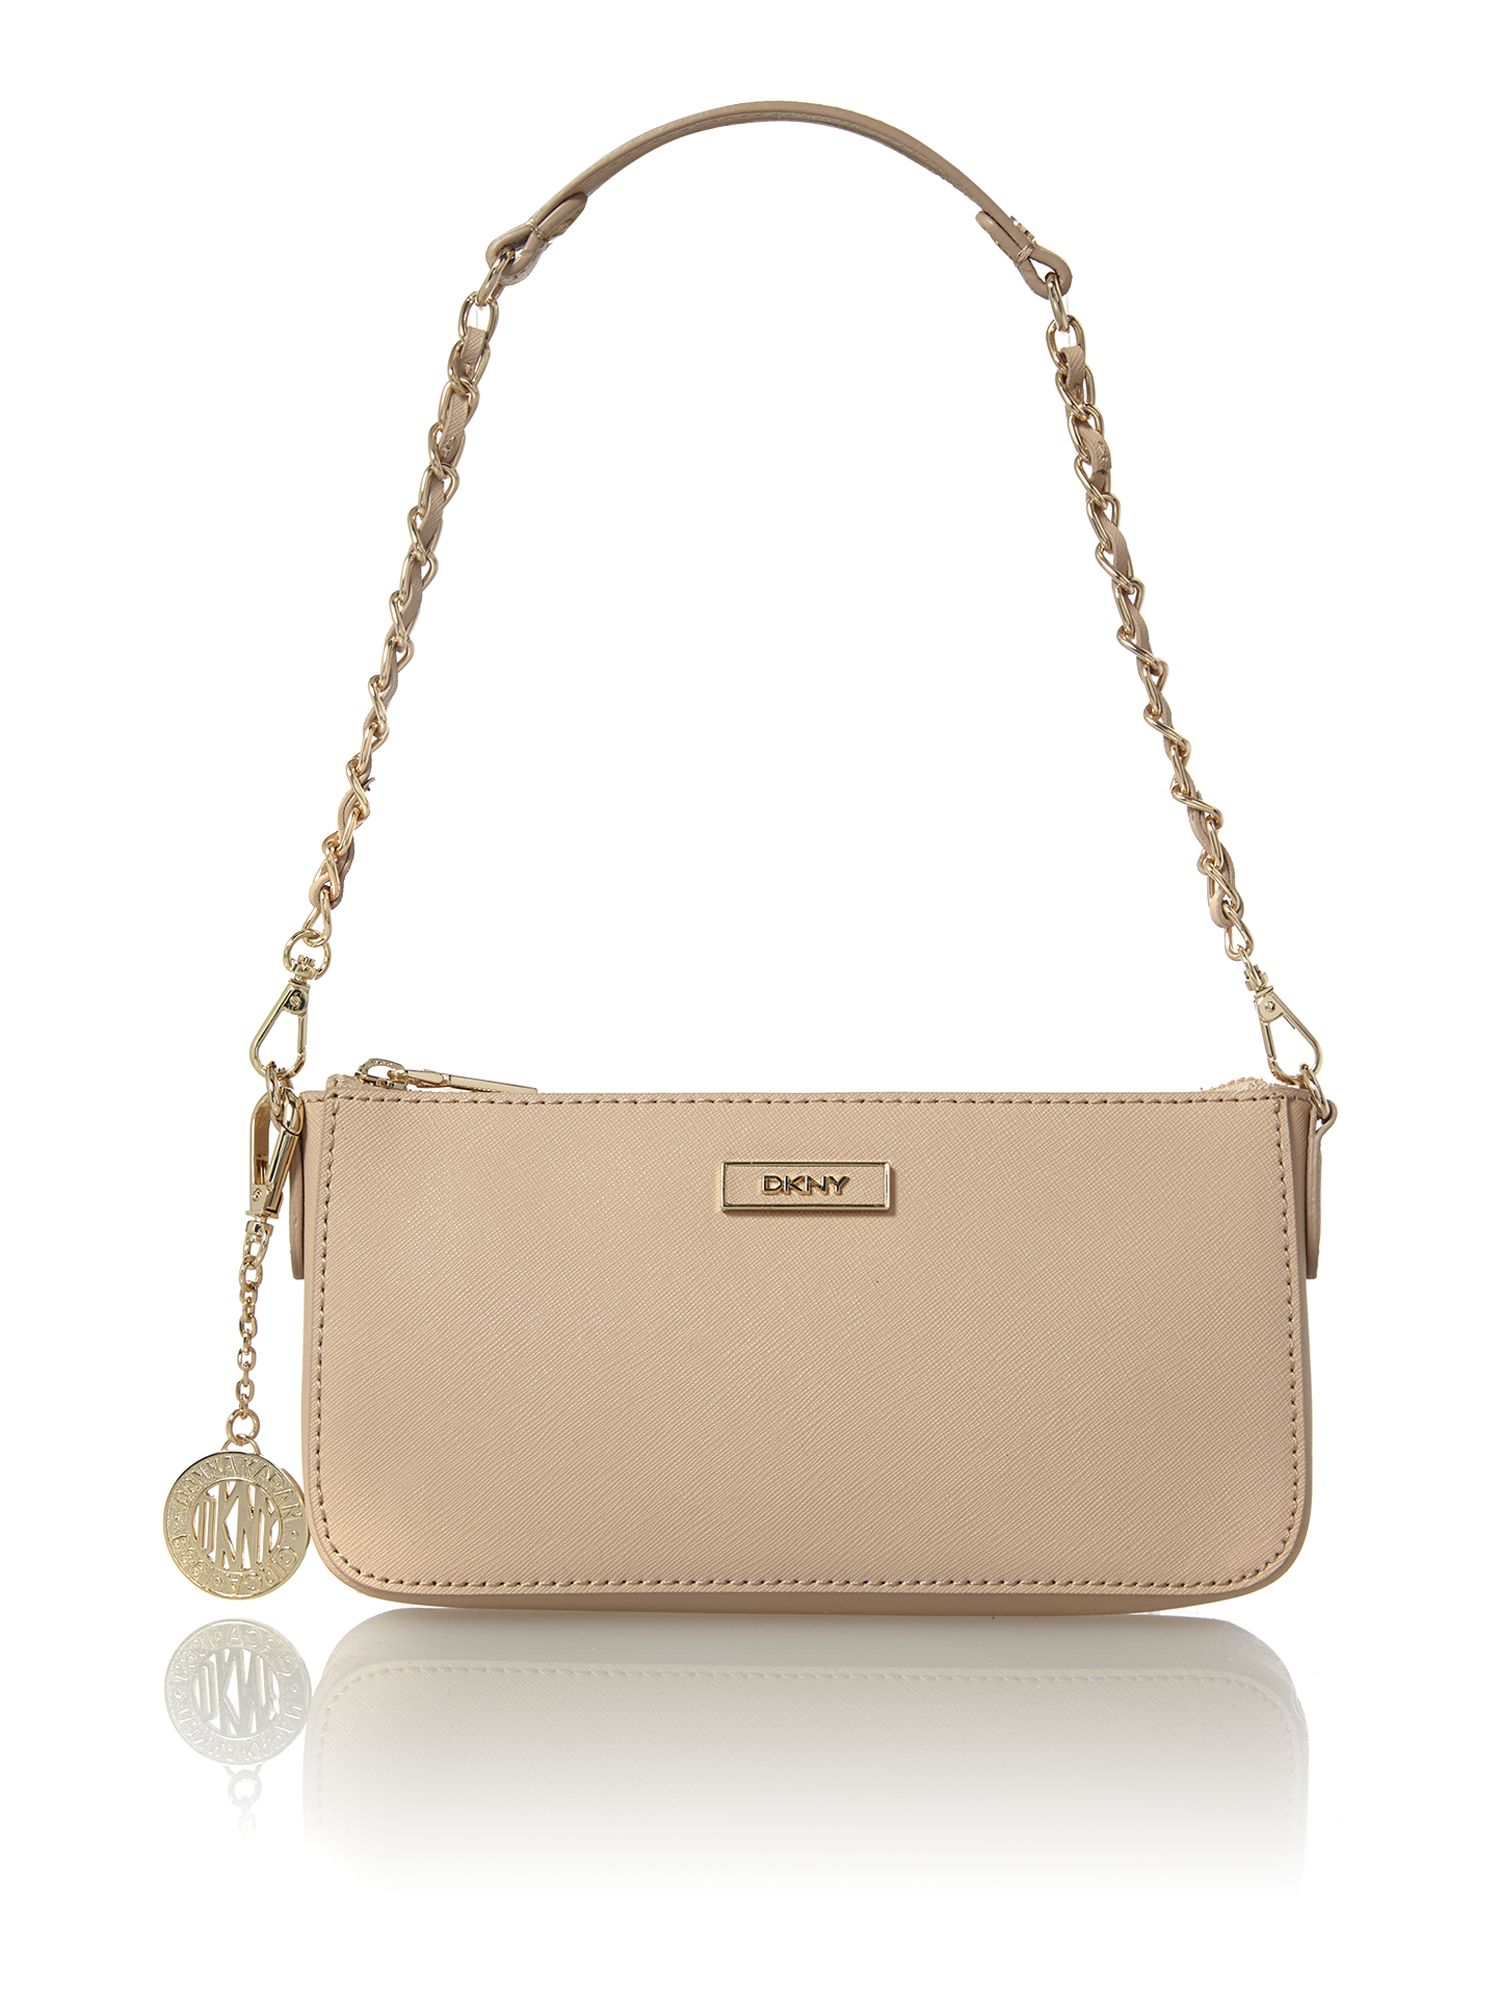 Dkny Saffiano Neutral Small Shoulder Bag in Beige (Neutral) | Lyst